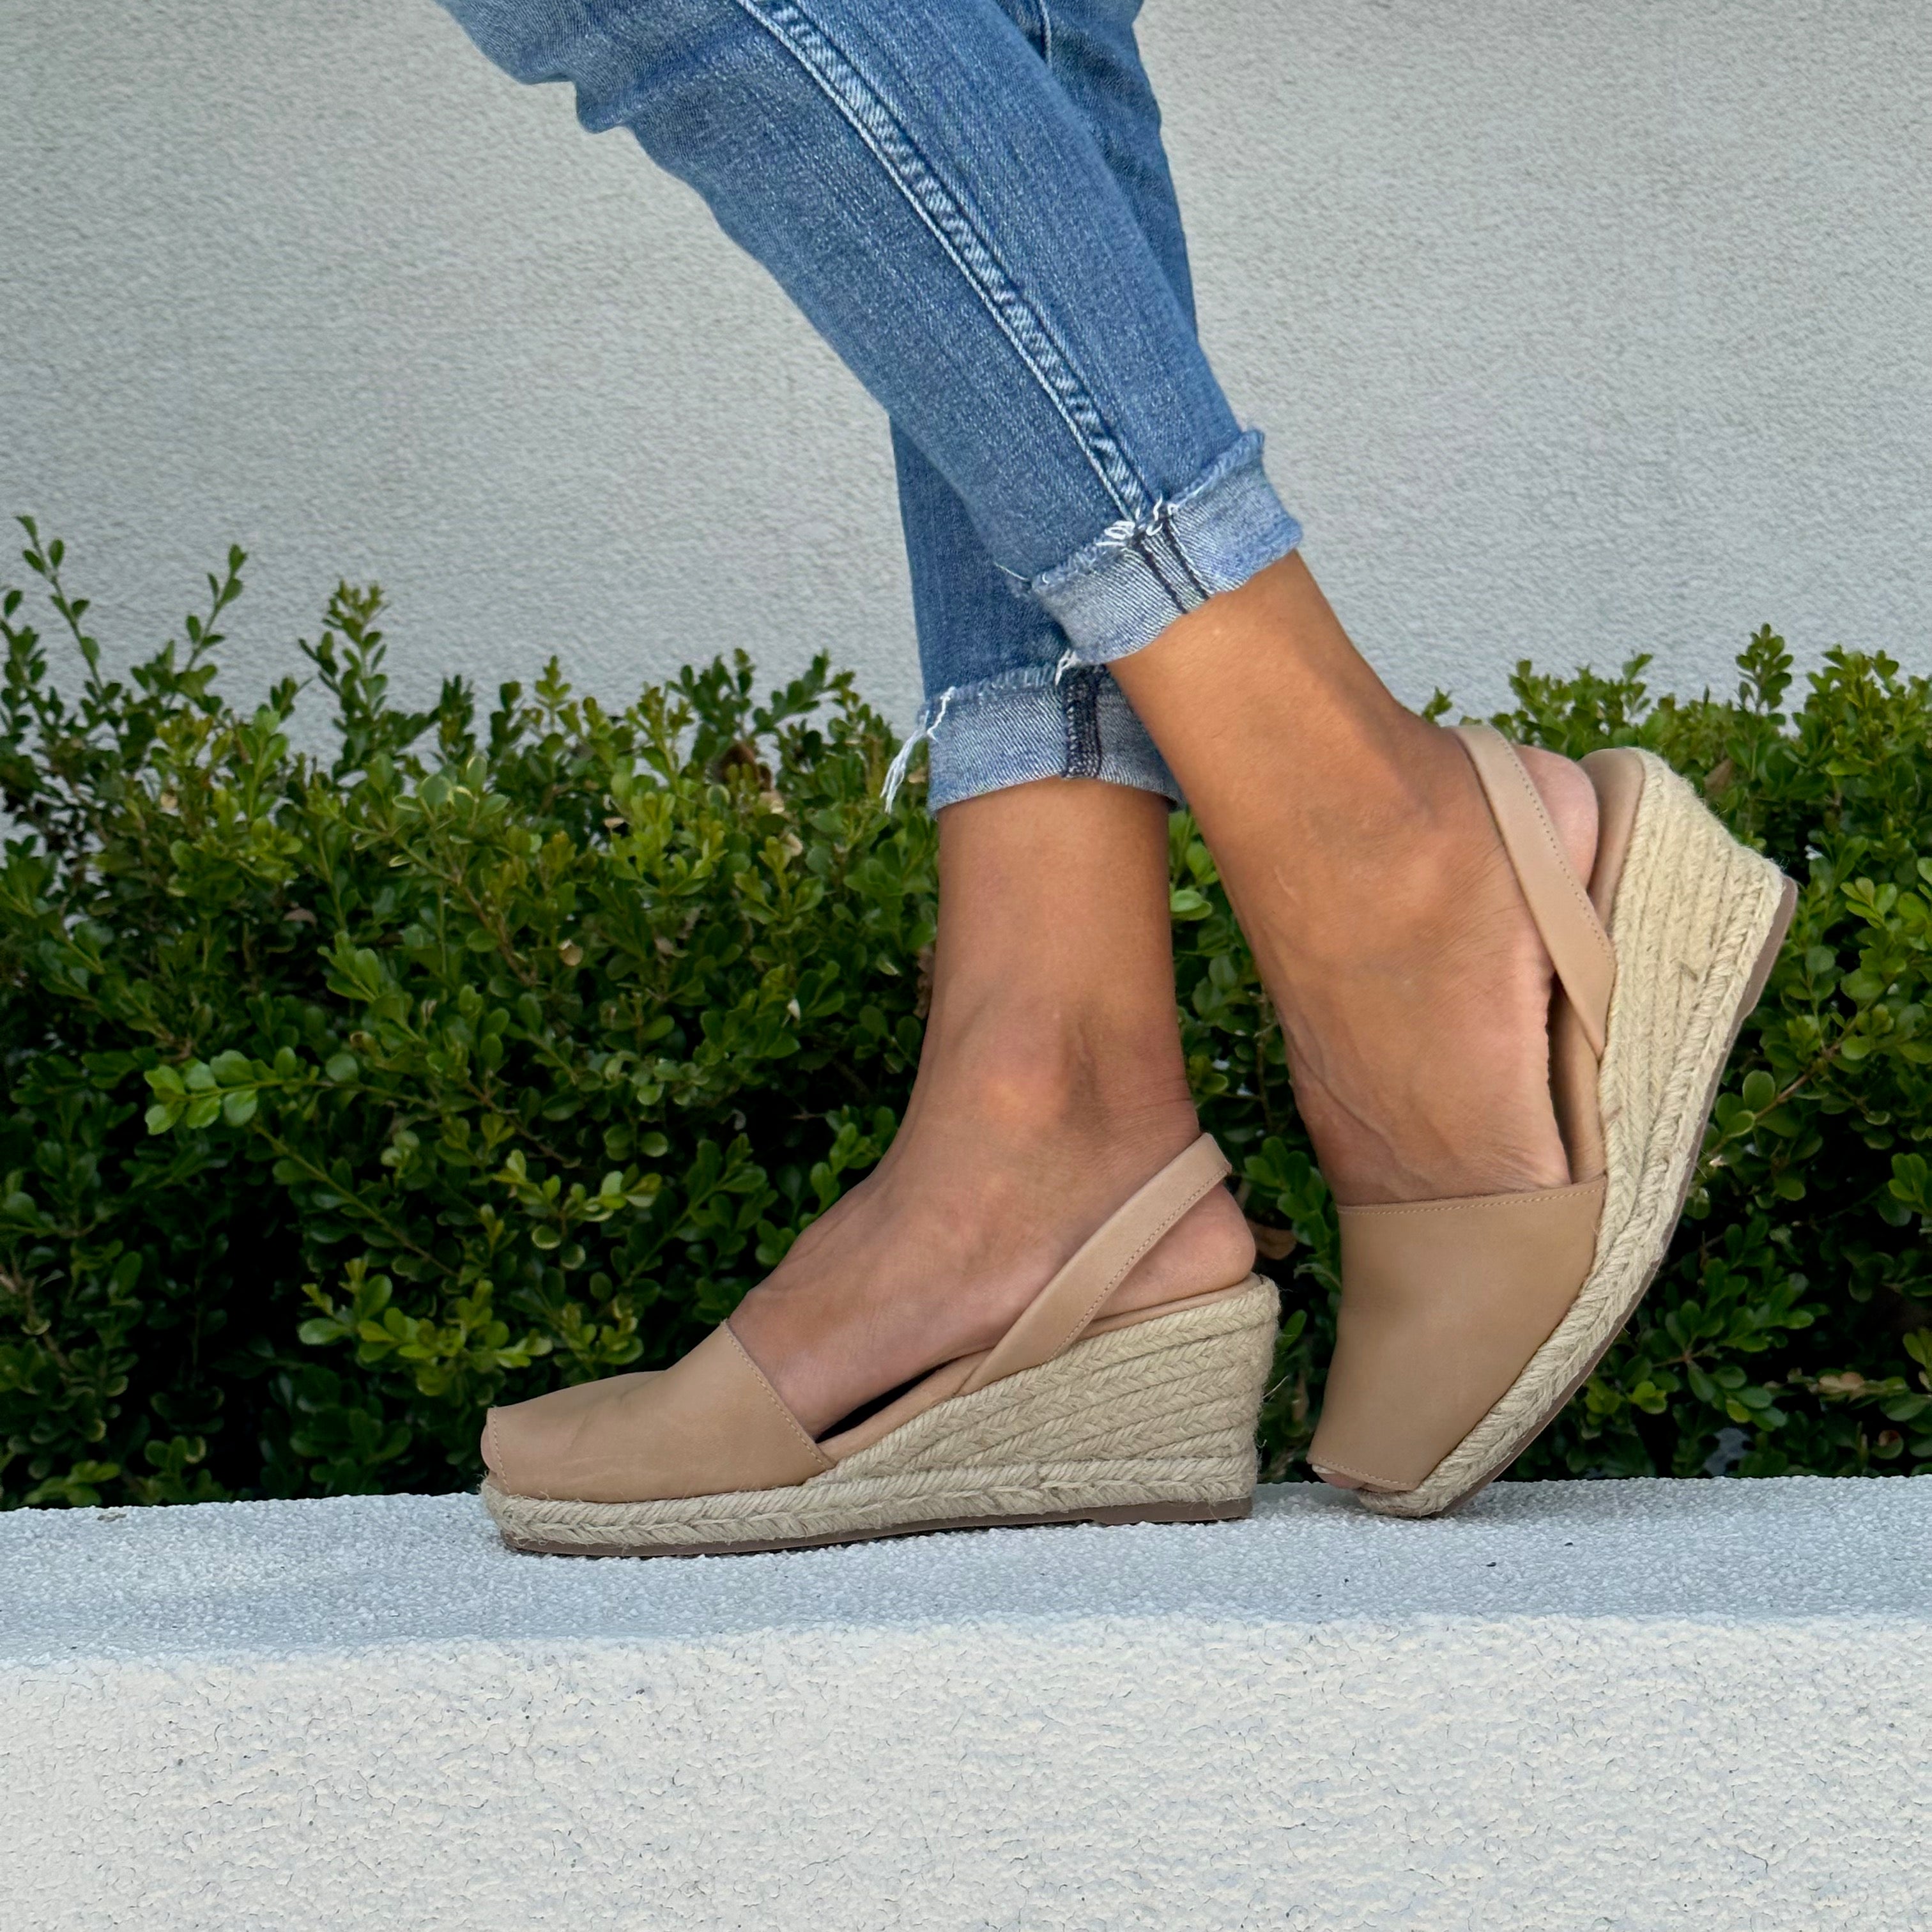 4 Easy ways to stretch your espadrilles